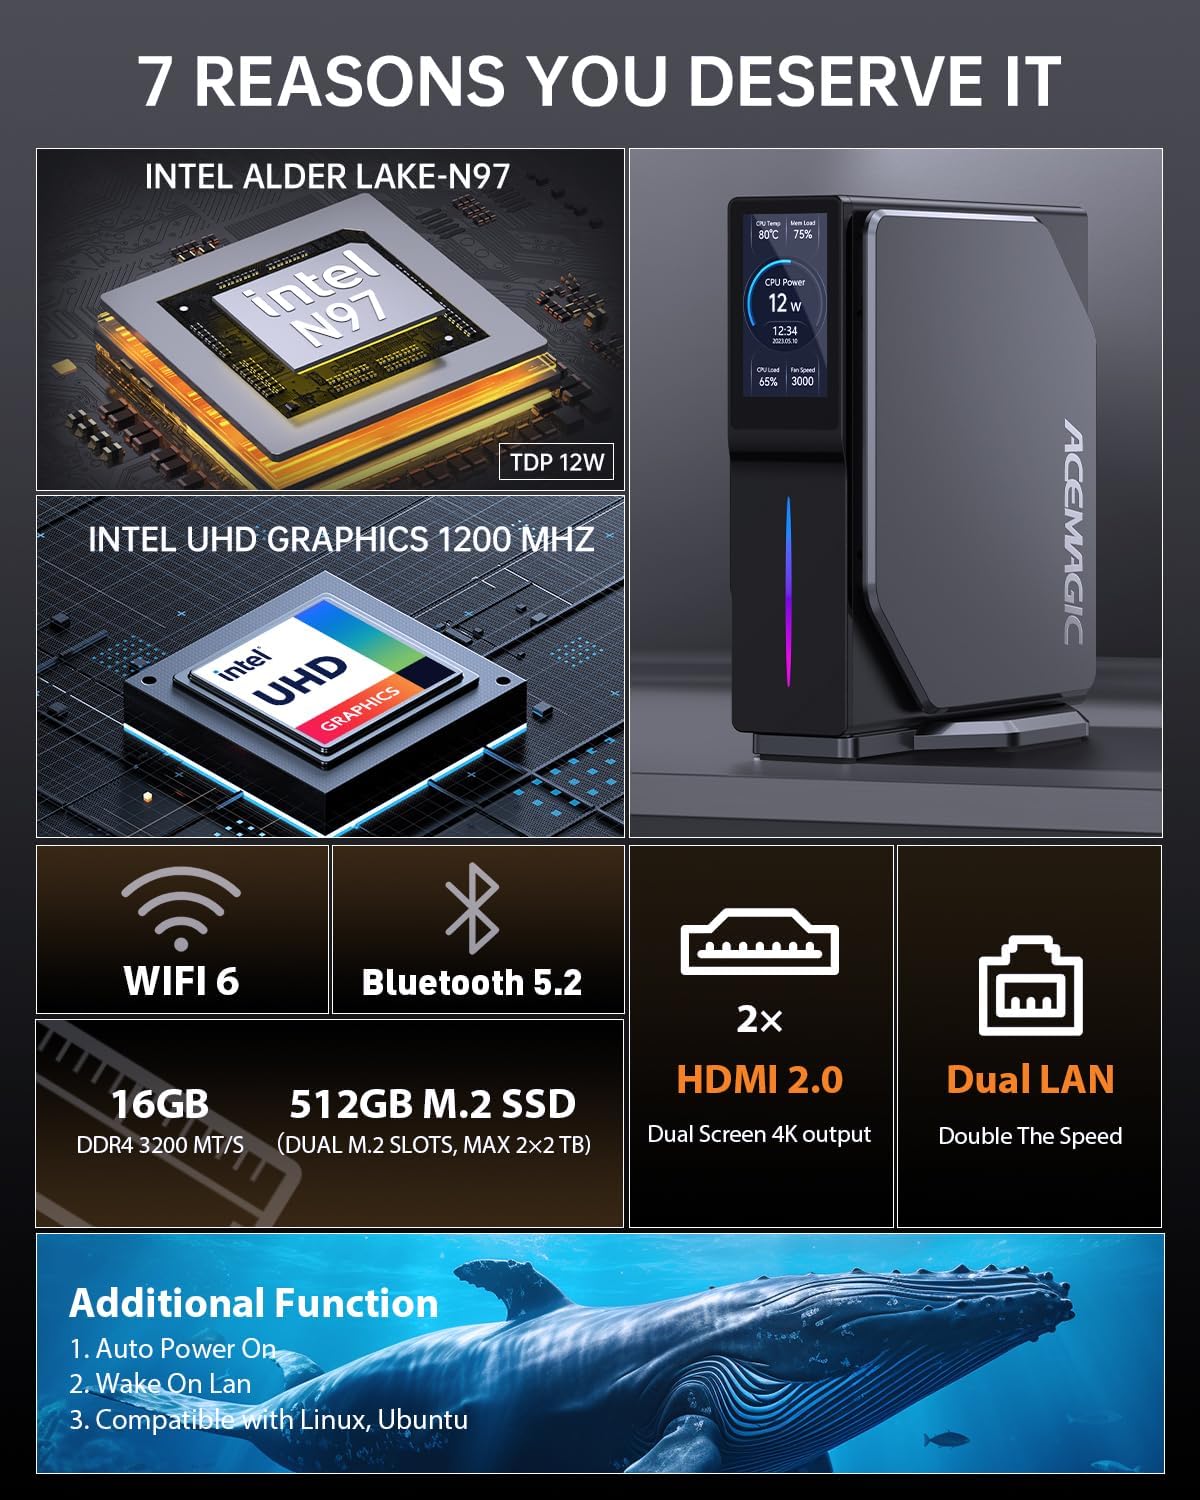 ACEMAGIC S1 Mini PC with LCD Screen, Intel Alder Lake-N95 (up to 3.4GHz), 16GB DDR4 512GB Vertical Mini Computer, Mini Tower PC with RGB Light, WiFi 5/BT/4K UHD/Dual LAN for HTPC/Office/Xmas Gift